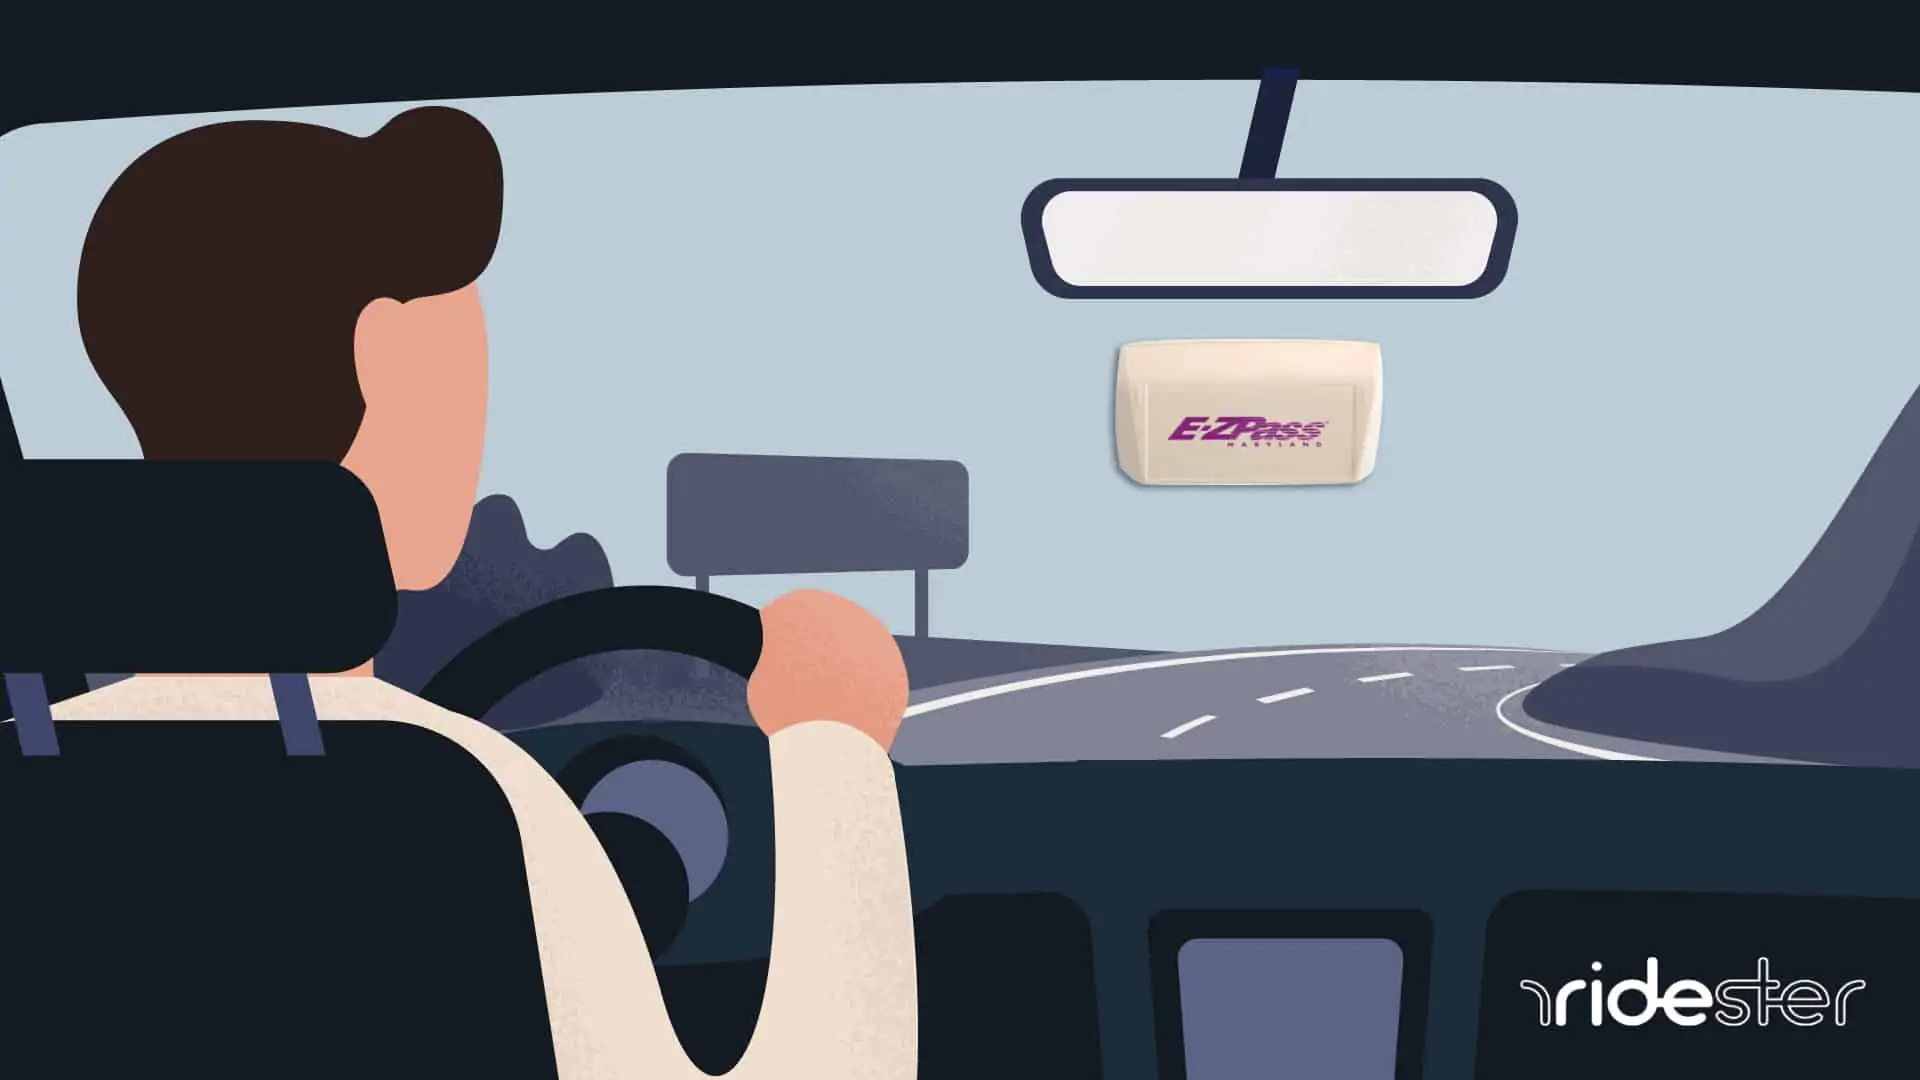 vector graphic showing ez pass on windshield of car driving down highway